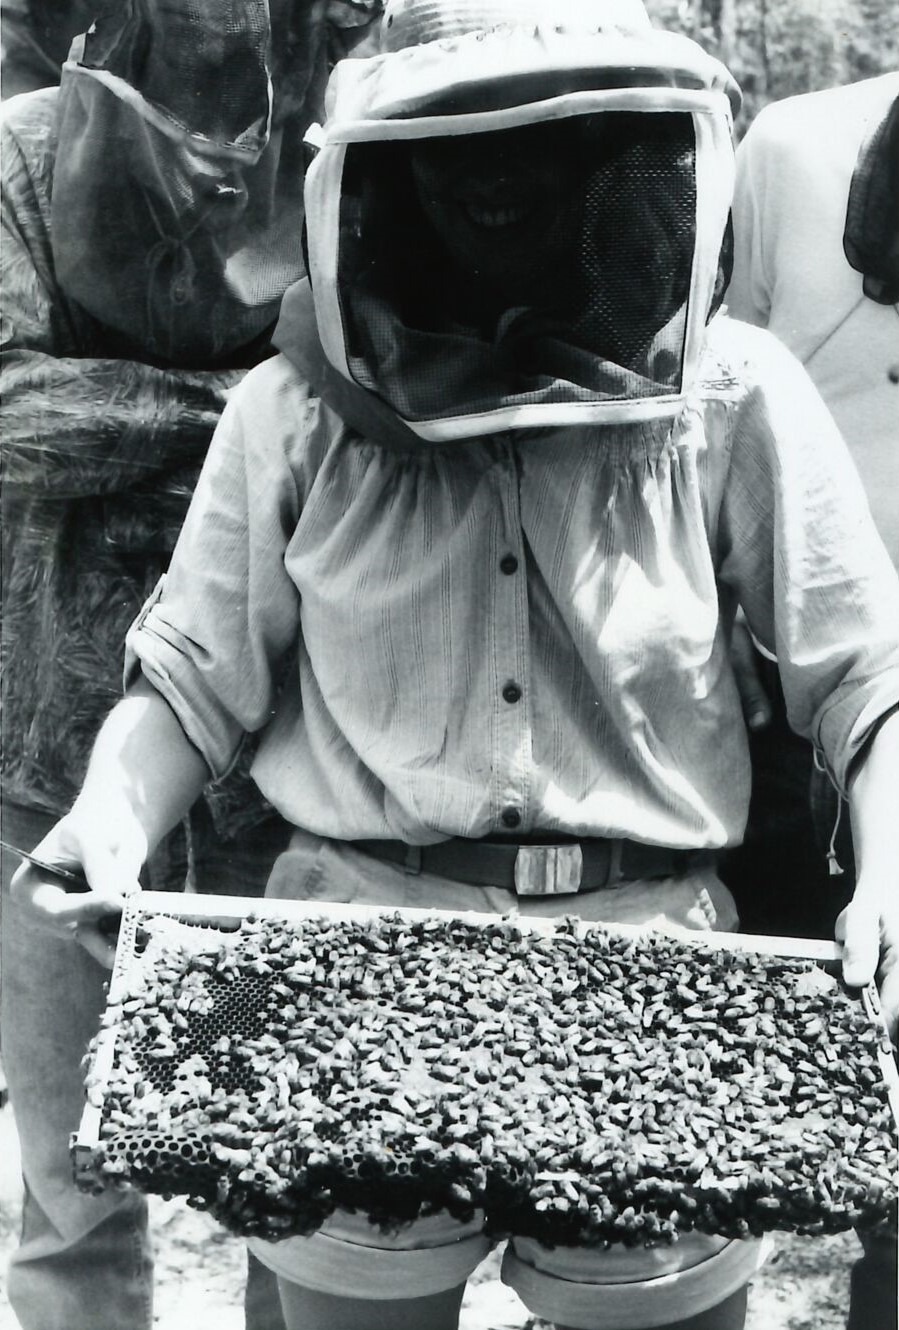 (1989) The Structural Pest division inspects an apiary.